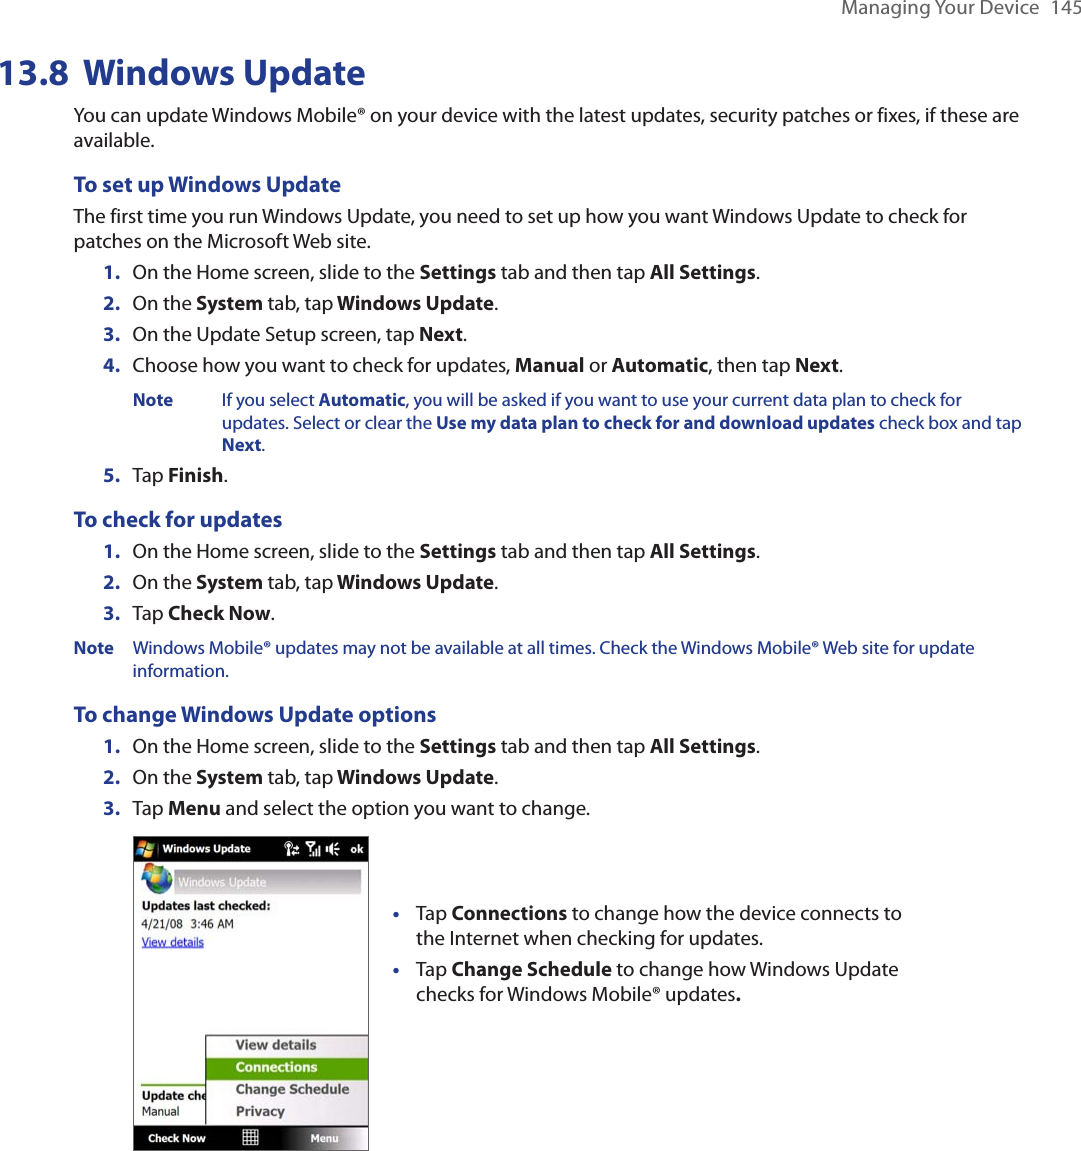 Managing Your Device  14513.8  Windows UpdateYou can update Windows Mobile® on your device with the latest updates, security patches or fixes, if these are available.To set up Windows UpdateThe first time you run Windows Update, you need to set up how you want Windows Update to check for patches on the Microsoft Web site.1.  On the Home screen, slide to the Settings tab and then tap All Settings. 2.  On the System tab, tap Windows Update.3.  On the Update Setup screen, tap Next.4.  Choose how you want to check for updates, Manual or Automatic, then tap Next.   Note  If you select Automatic, you will be asked if you want to use your current data plan to check for        updates. Select or clear the Use my data plan to check for and download updates check box and tap      Next.5.  Tap Finish.To check for updates1.  On the Home screen, slide to the Settings tab and then tap All Settings. 2.  On the System tab, tap Windows Update.3.  Tap Check Now.Note  Windows Mobile® updates may not be available at all times. Check the Windows Mobile® Web site for update information.To change Windows Update options1.  On the Home screen, slide to the Settings tab and then tap All Settings. 2.  On the System tab, tap Windows Update.3.  Tap Menu and select the option you want to change. Tap Connections to change how the device connects to the Internet when checking for updates.Tap Change Schedule to change how Windows Update checks for Windows Mobile® updates. ••